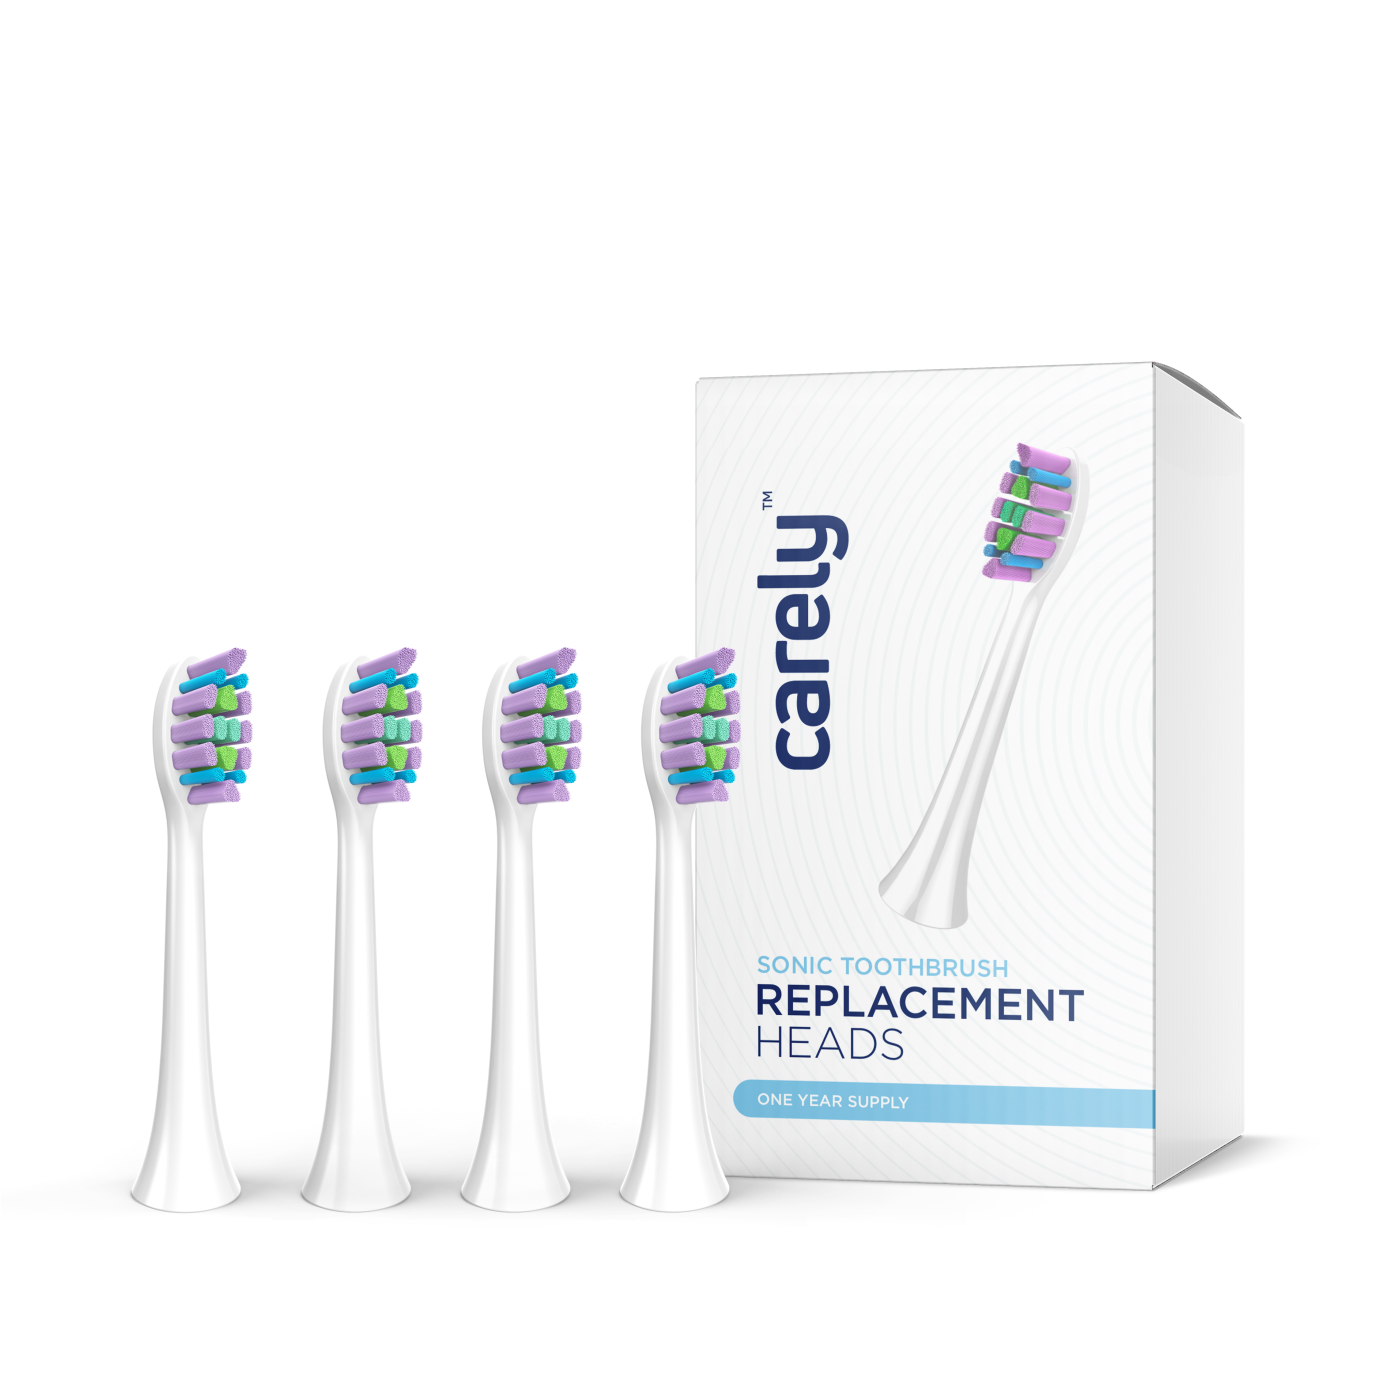 Sonic Toothbrush Replacement Heads - 4 Pack - Carely